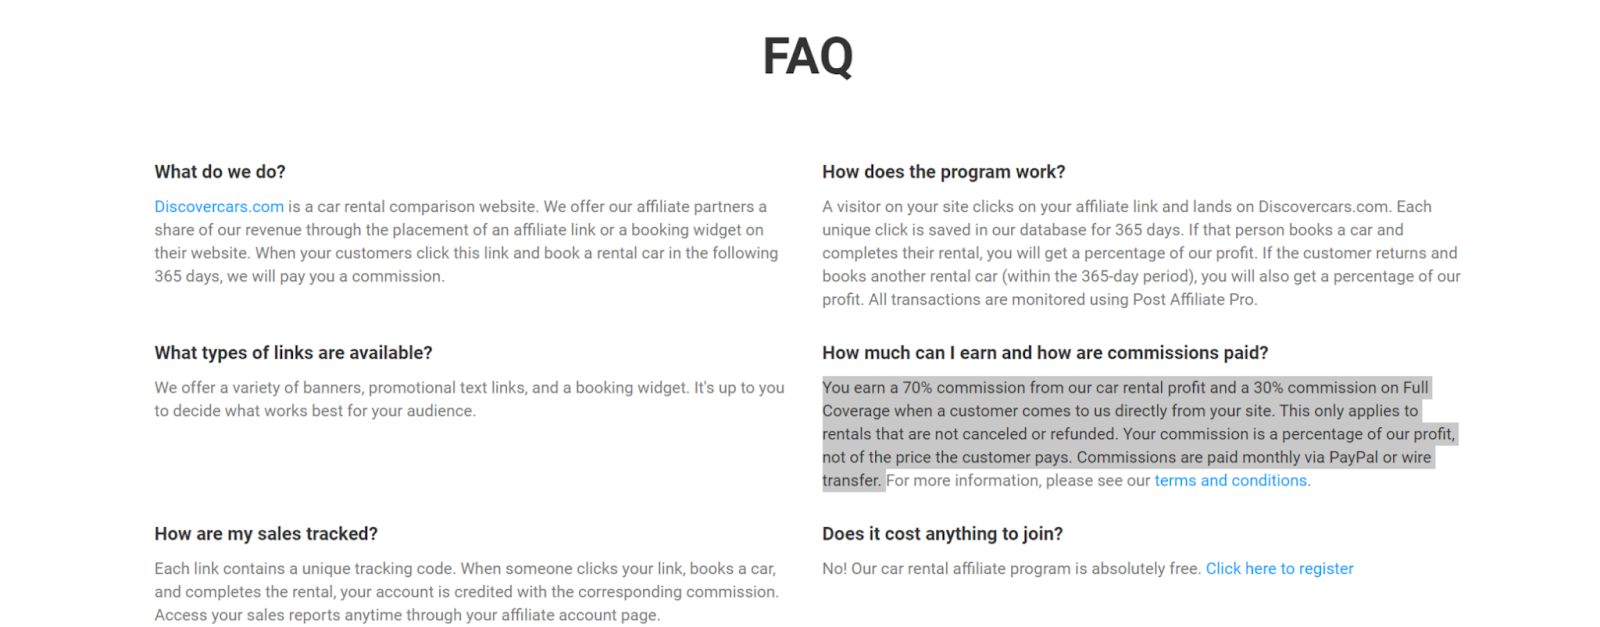 Discover cars affiliate program FAQs page